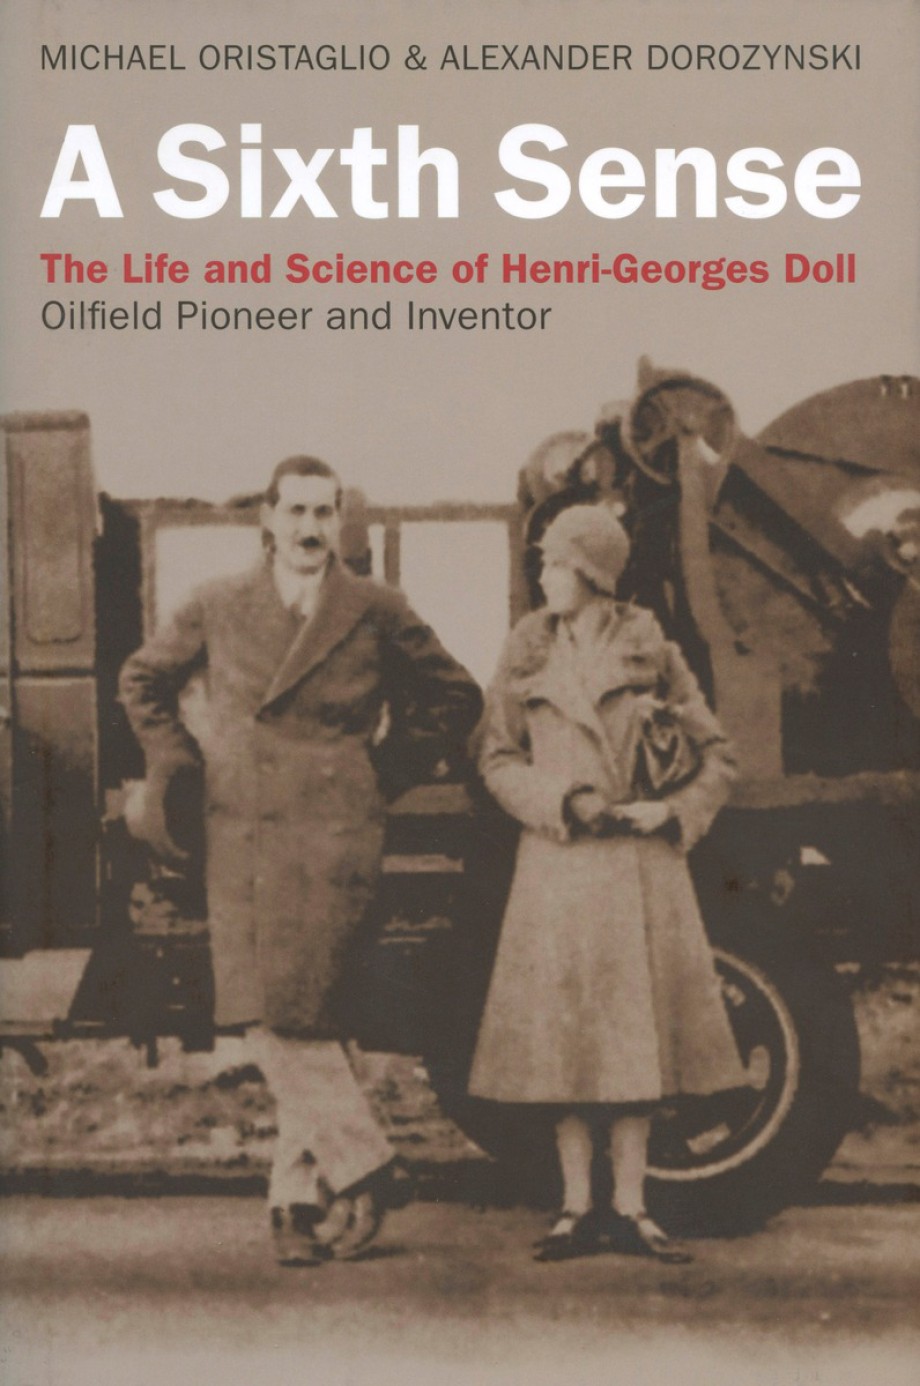 Sixth Sense The Life and Science of Henri-Georges Doll: Oilfield Pioneer and Inventor